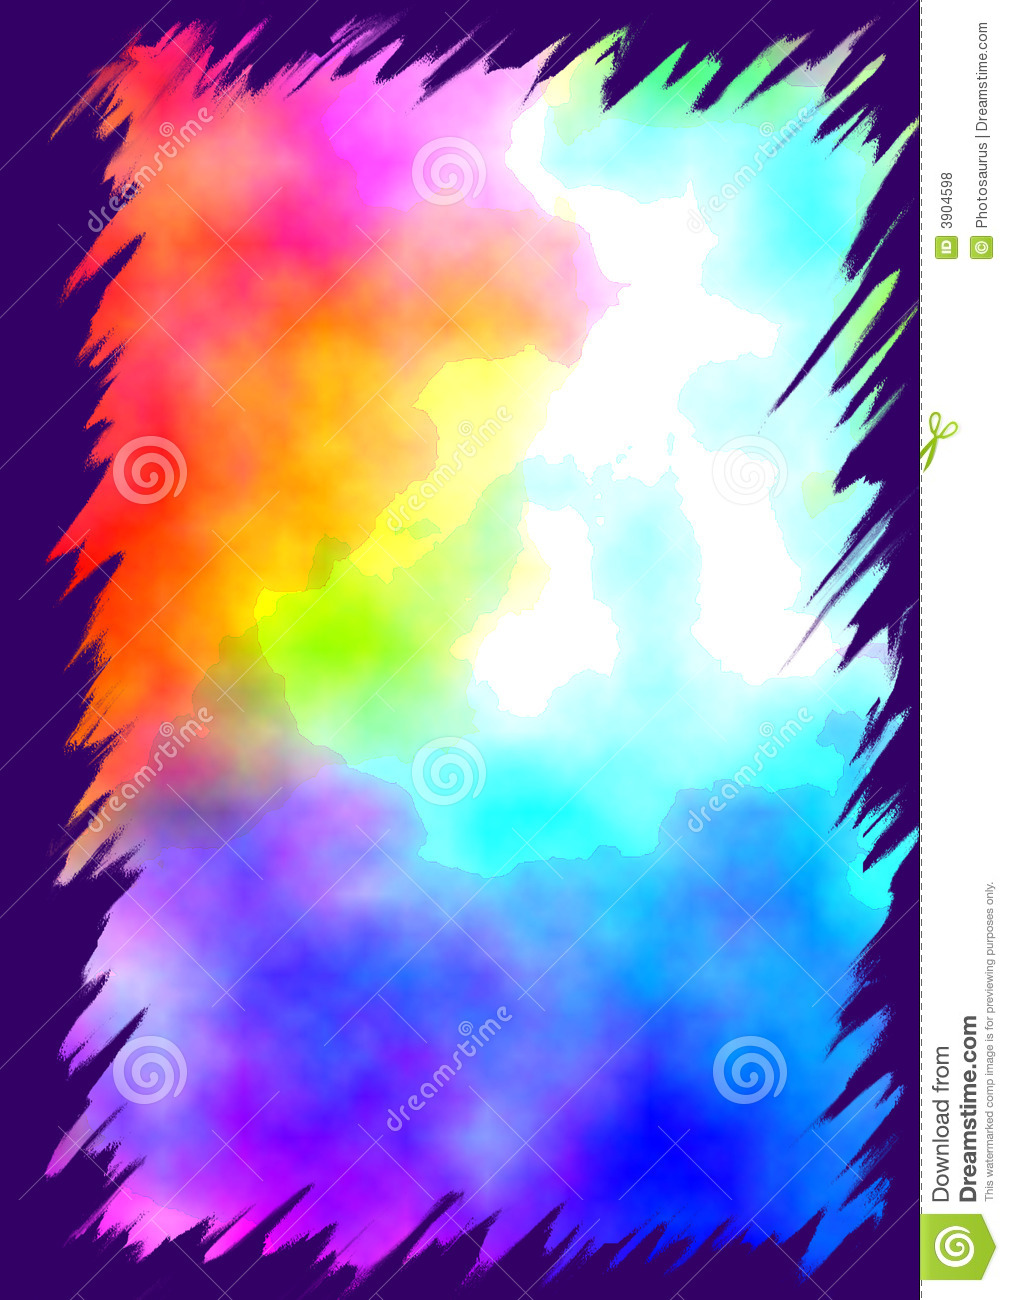 Water Colors With Jagged Border Royalty Free Stock Photos   Image    